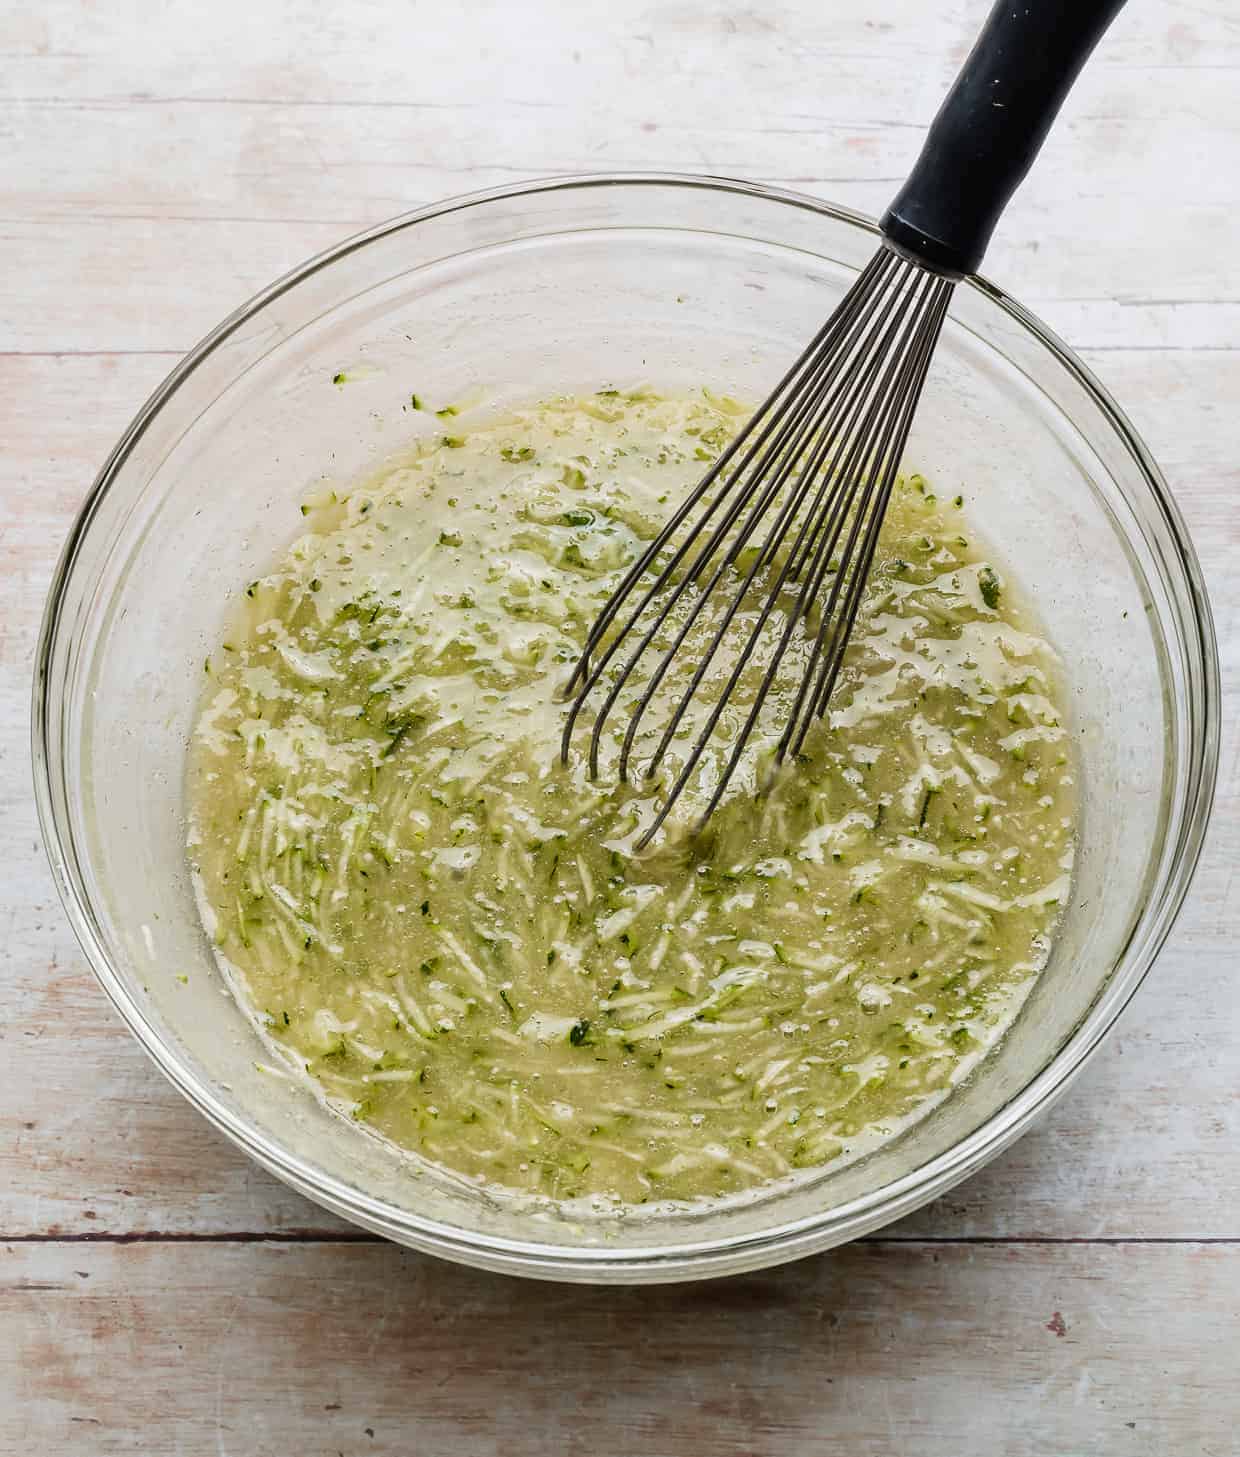 Shredded zucchini in a glass bowl with a whisk.